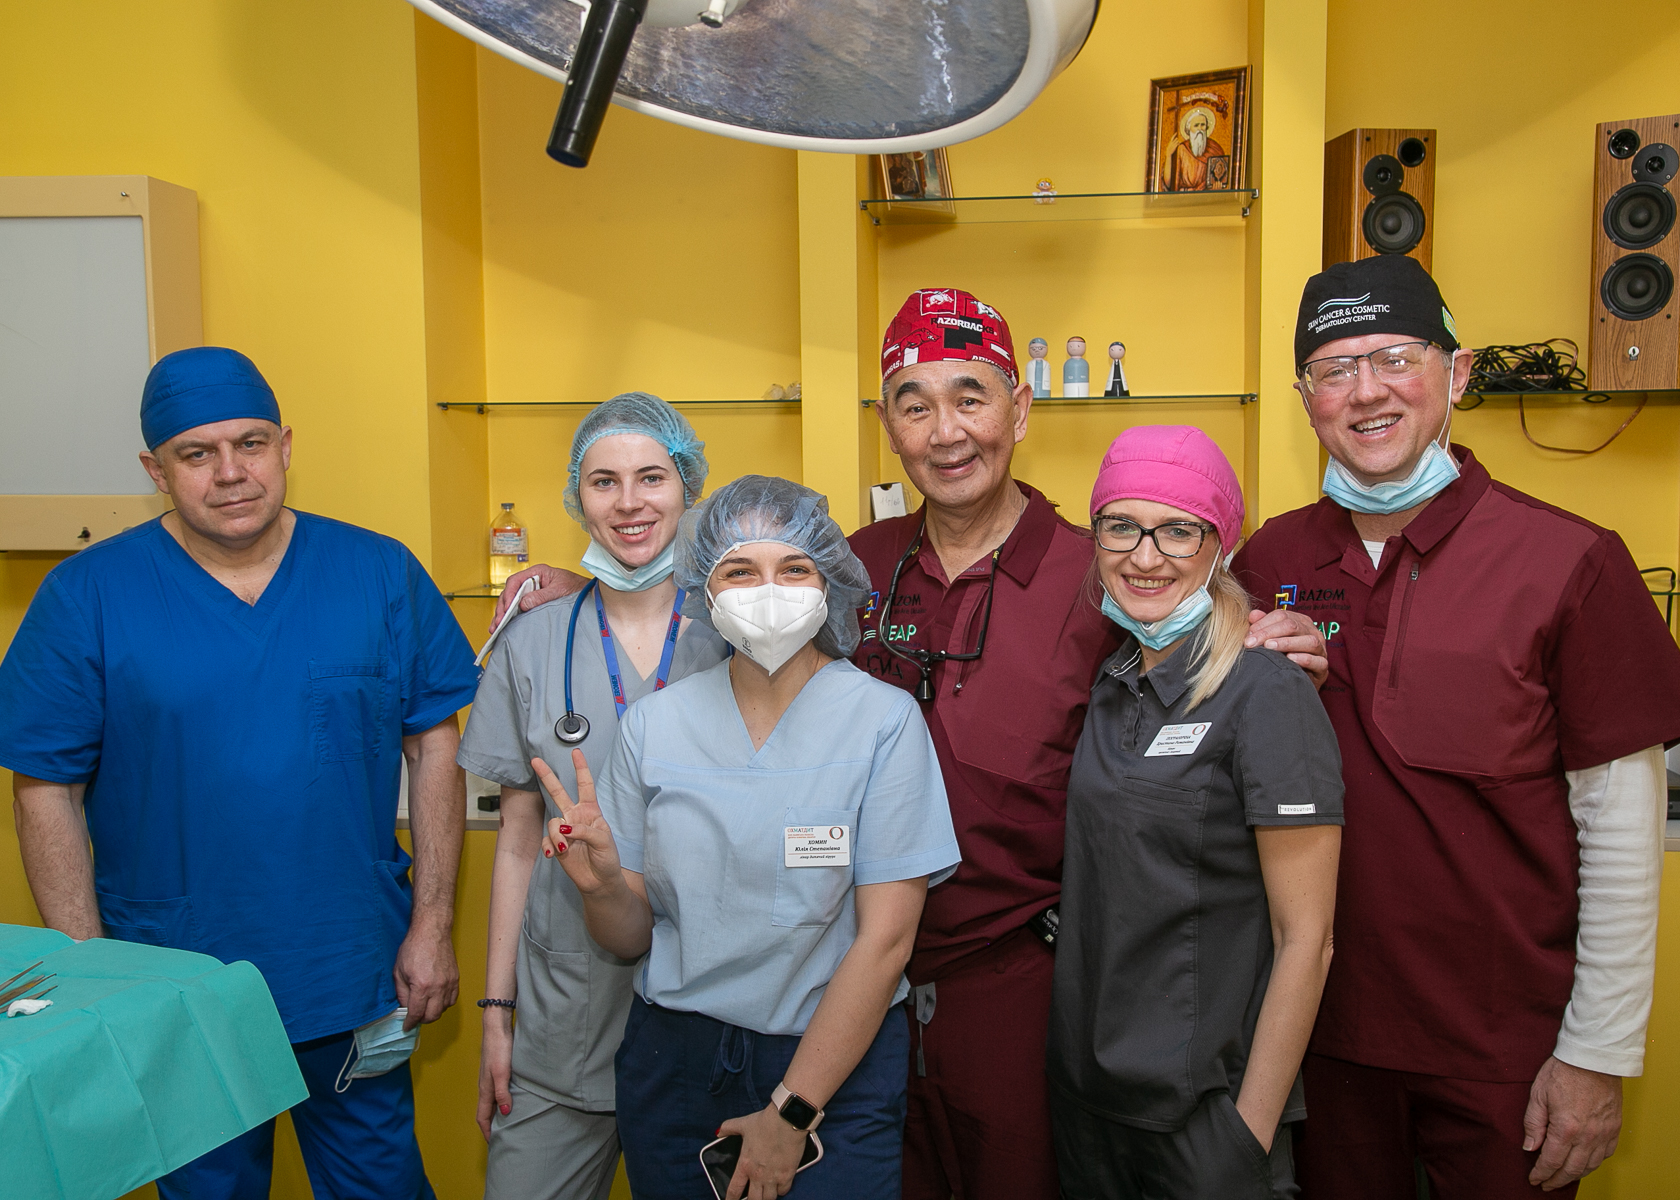 Following surgery, members of the surgical team in the Ukraine pose for a photo.